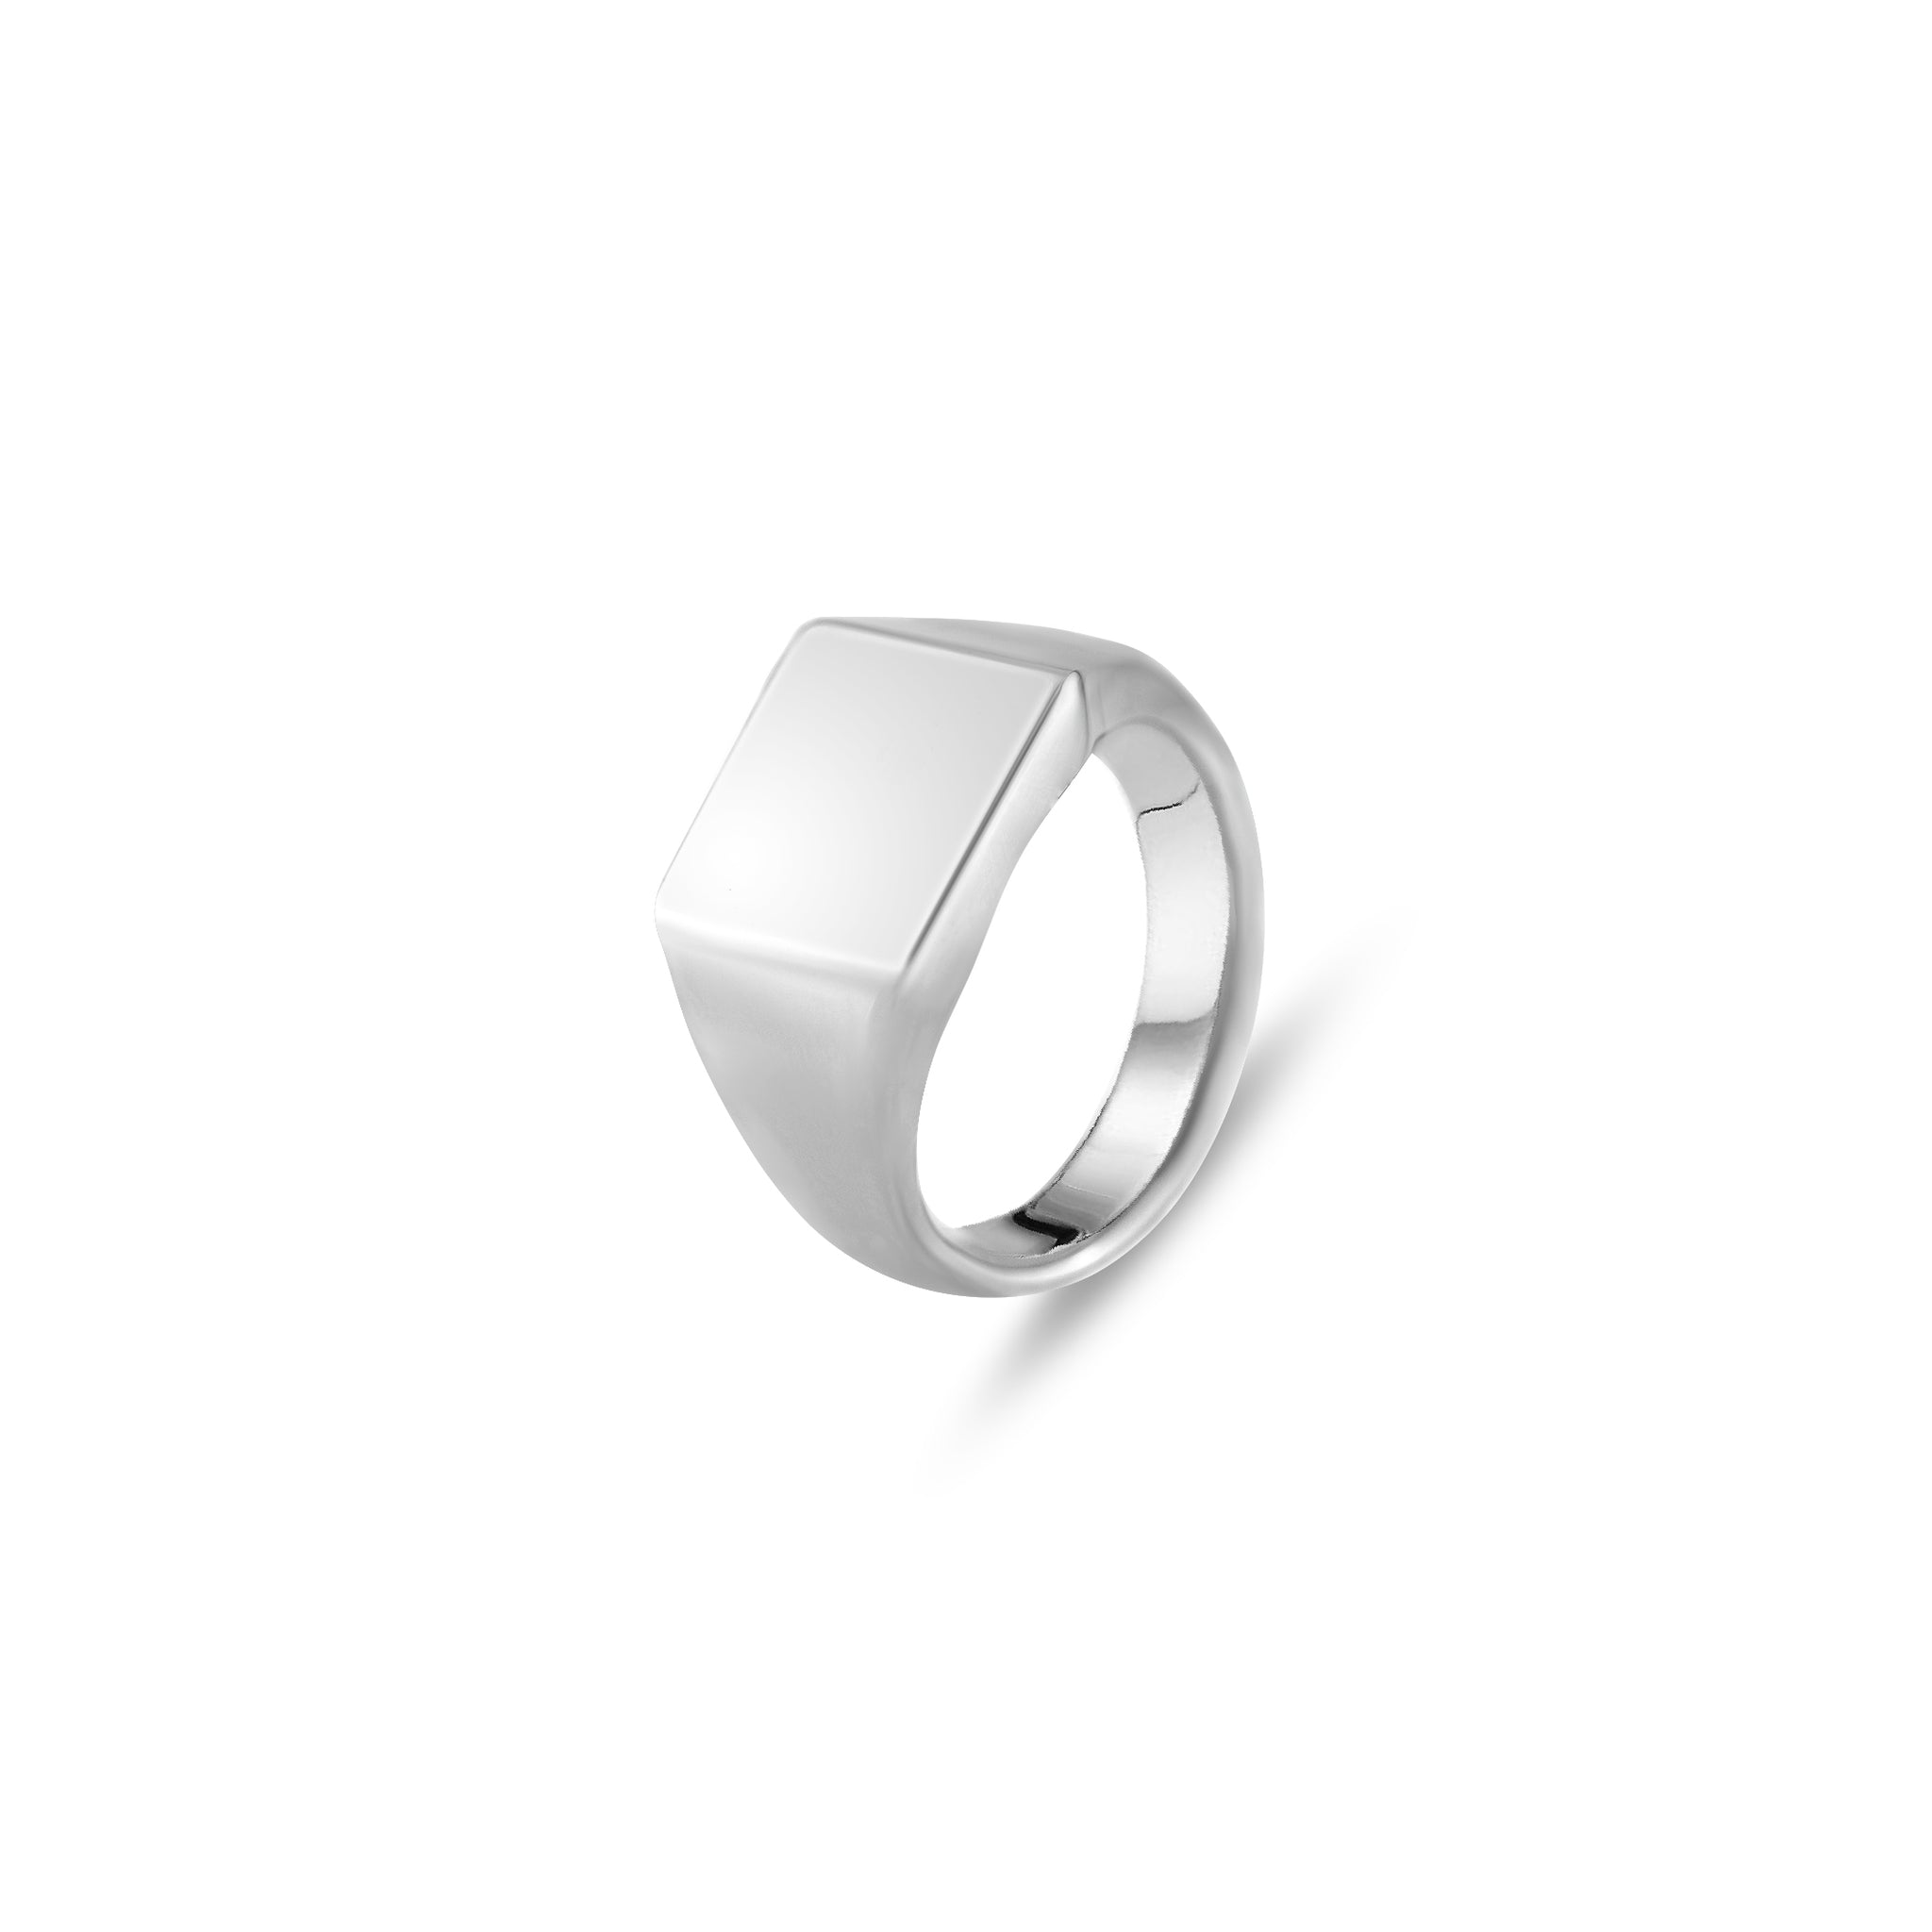 Silver 12 x 12mm Square Signet Ring